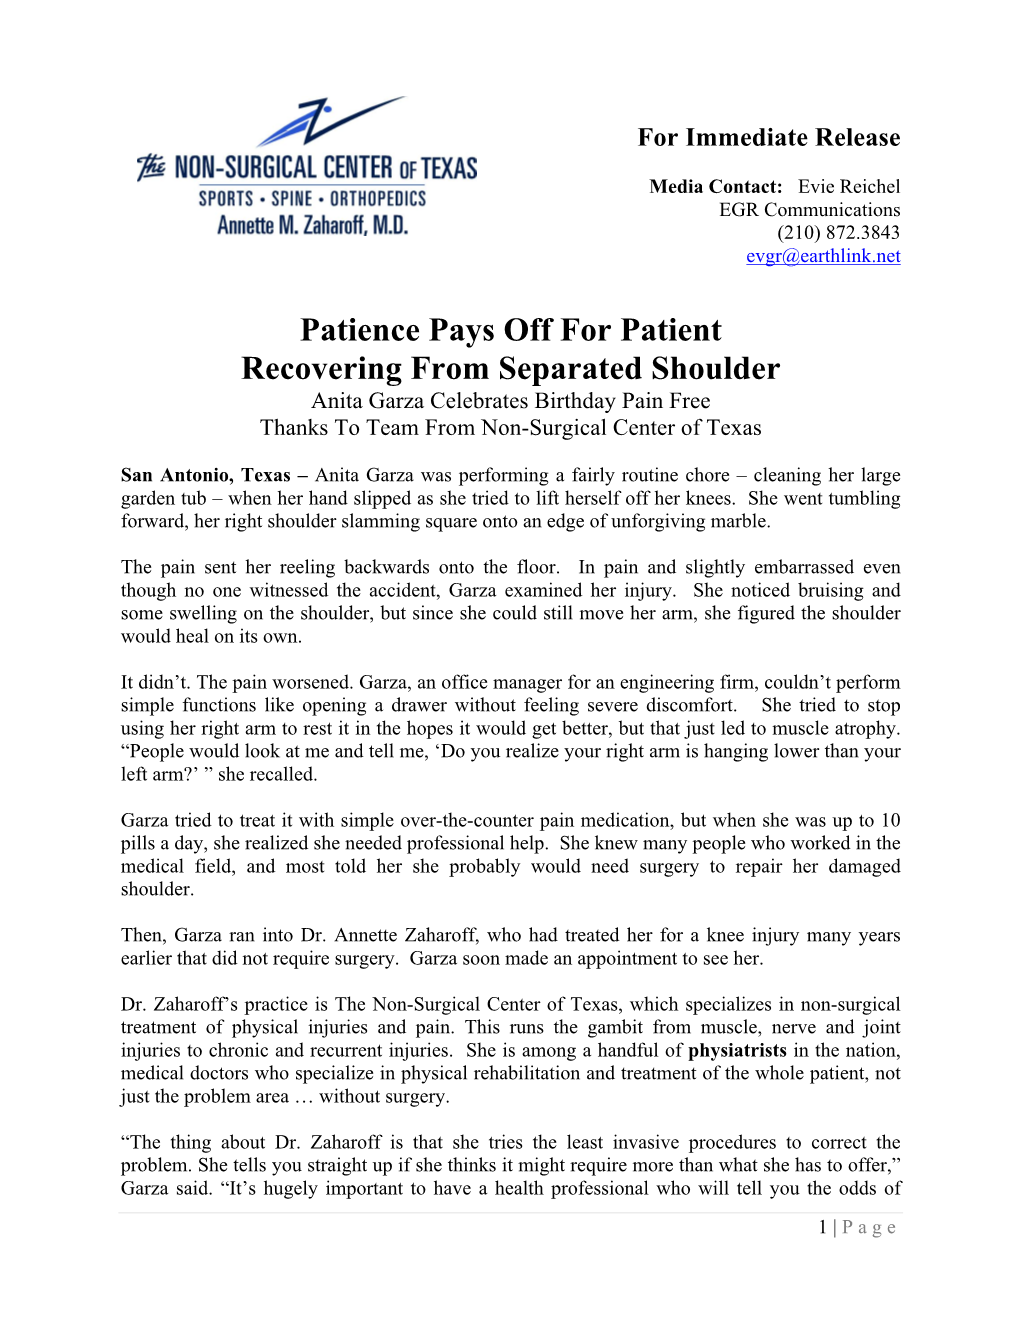 Patience Pays Off for Patient Recovering from Separated Shoulder Anita Garza Celebrates Birthday Pain Free Thanks to Team from Non-Surgical Center of Texas